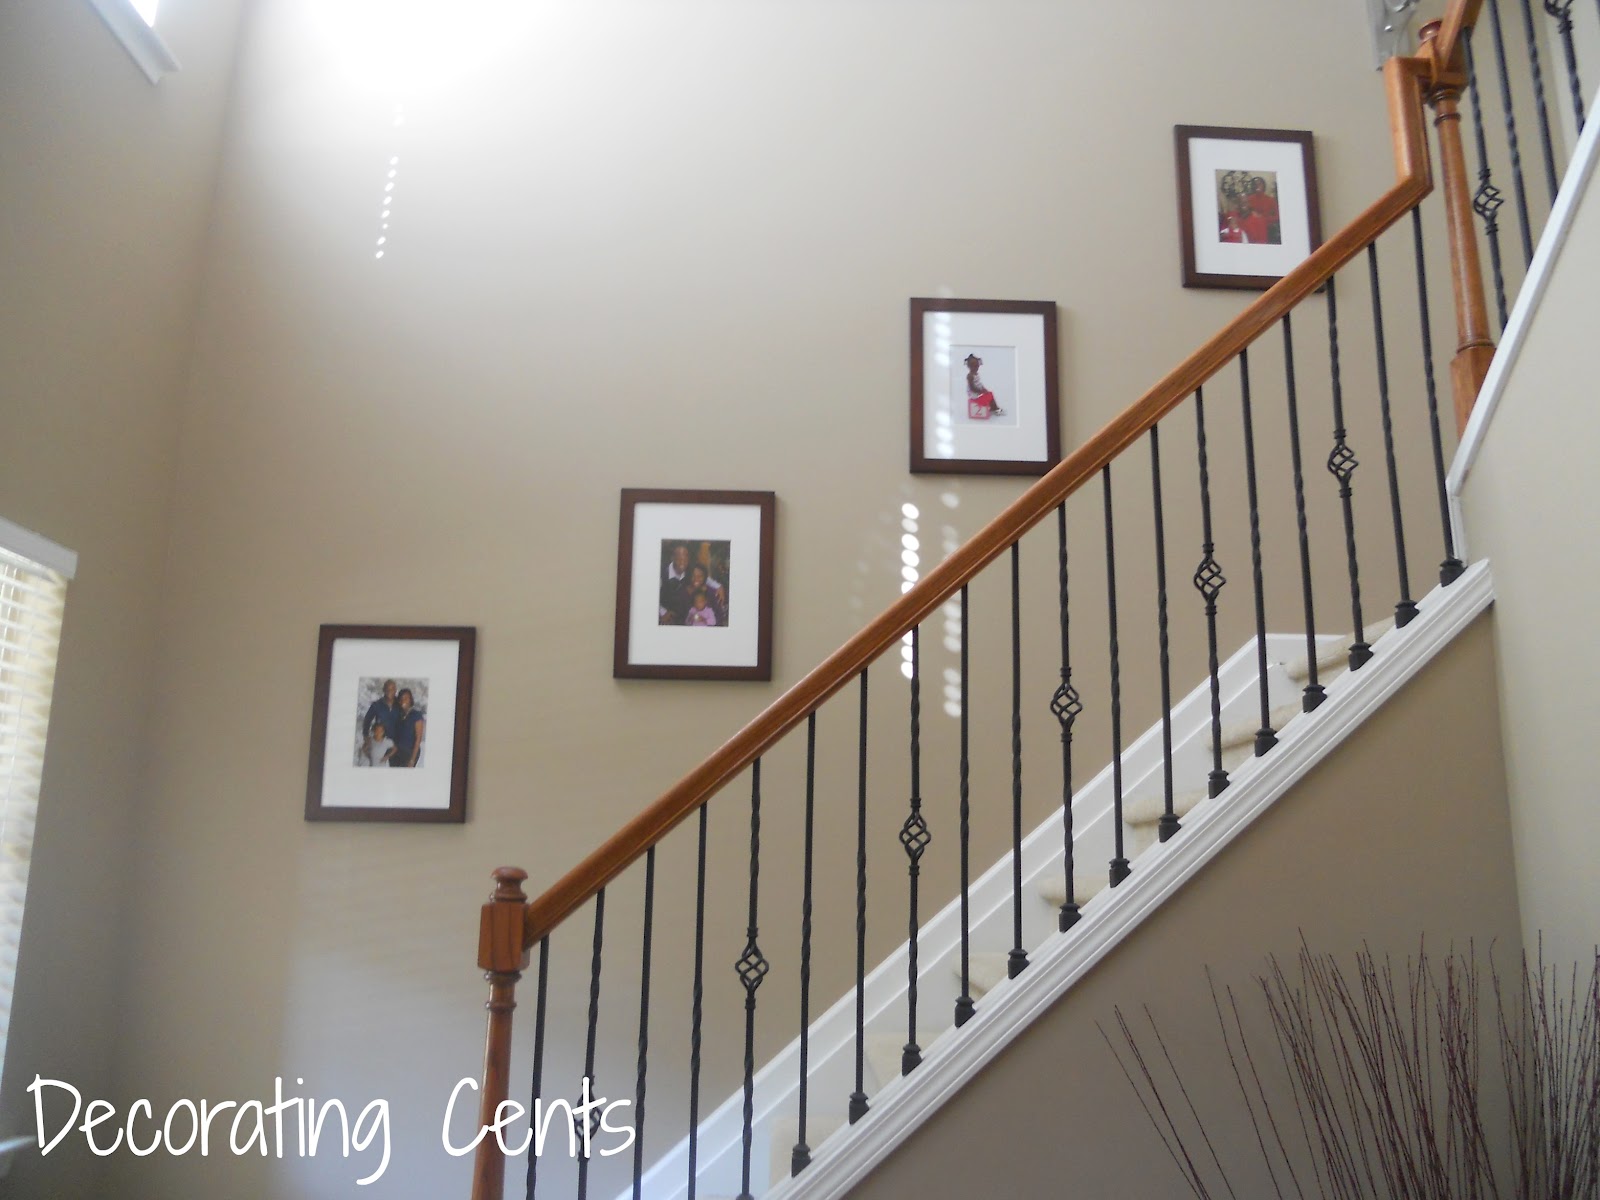 Entryway Photo Gallery Wall Decorating Cents